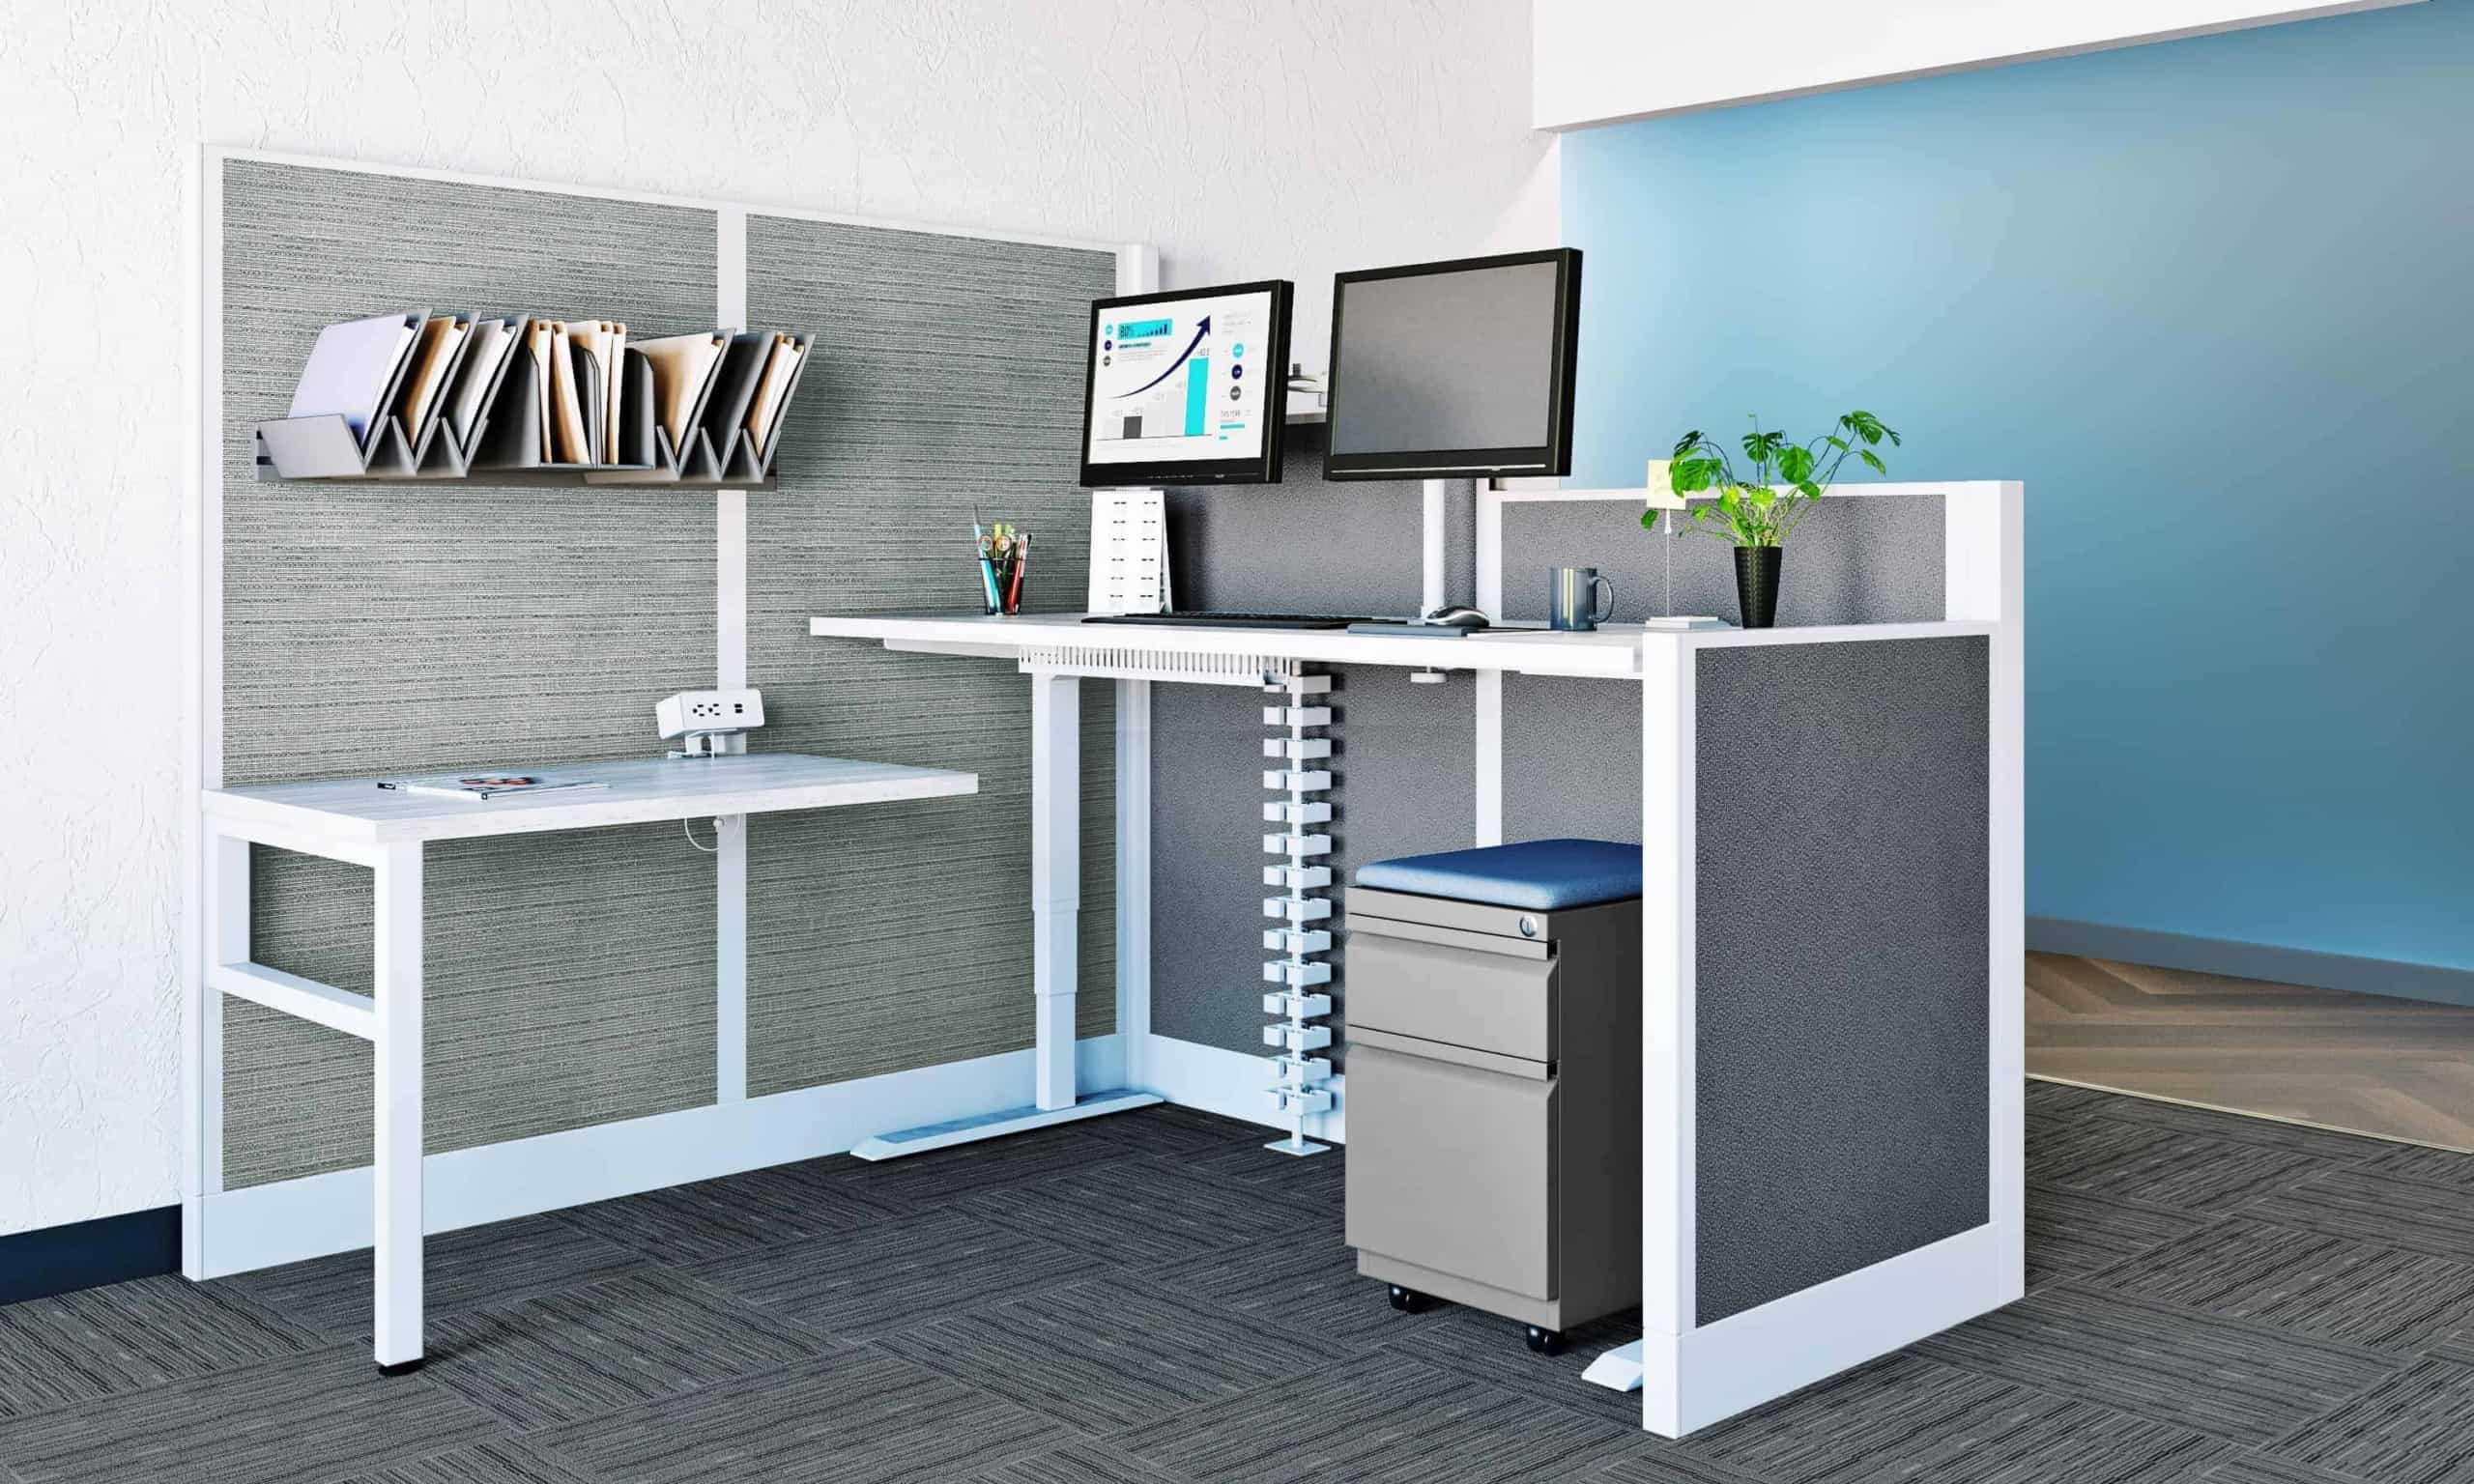 4 Person Height Adjustable Workstation